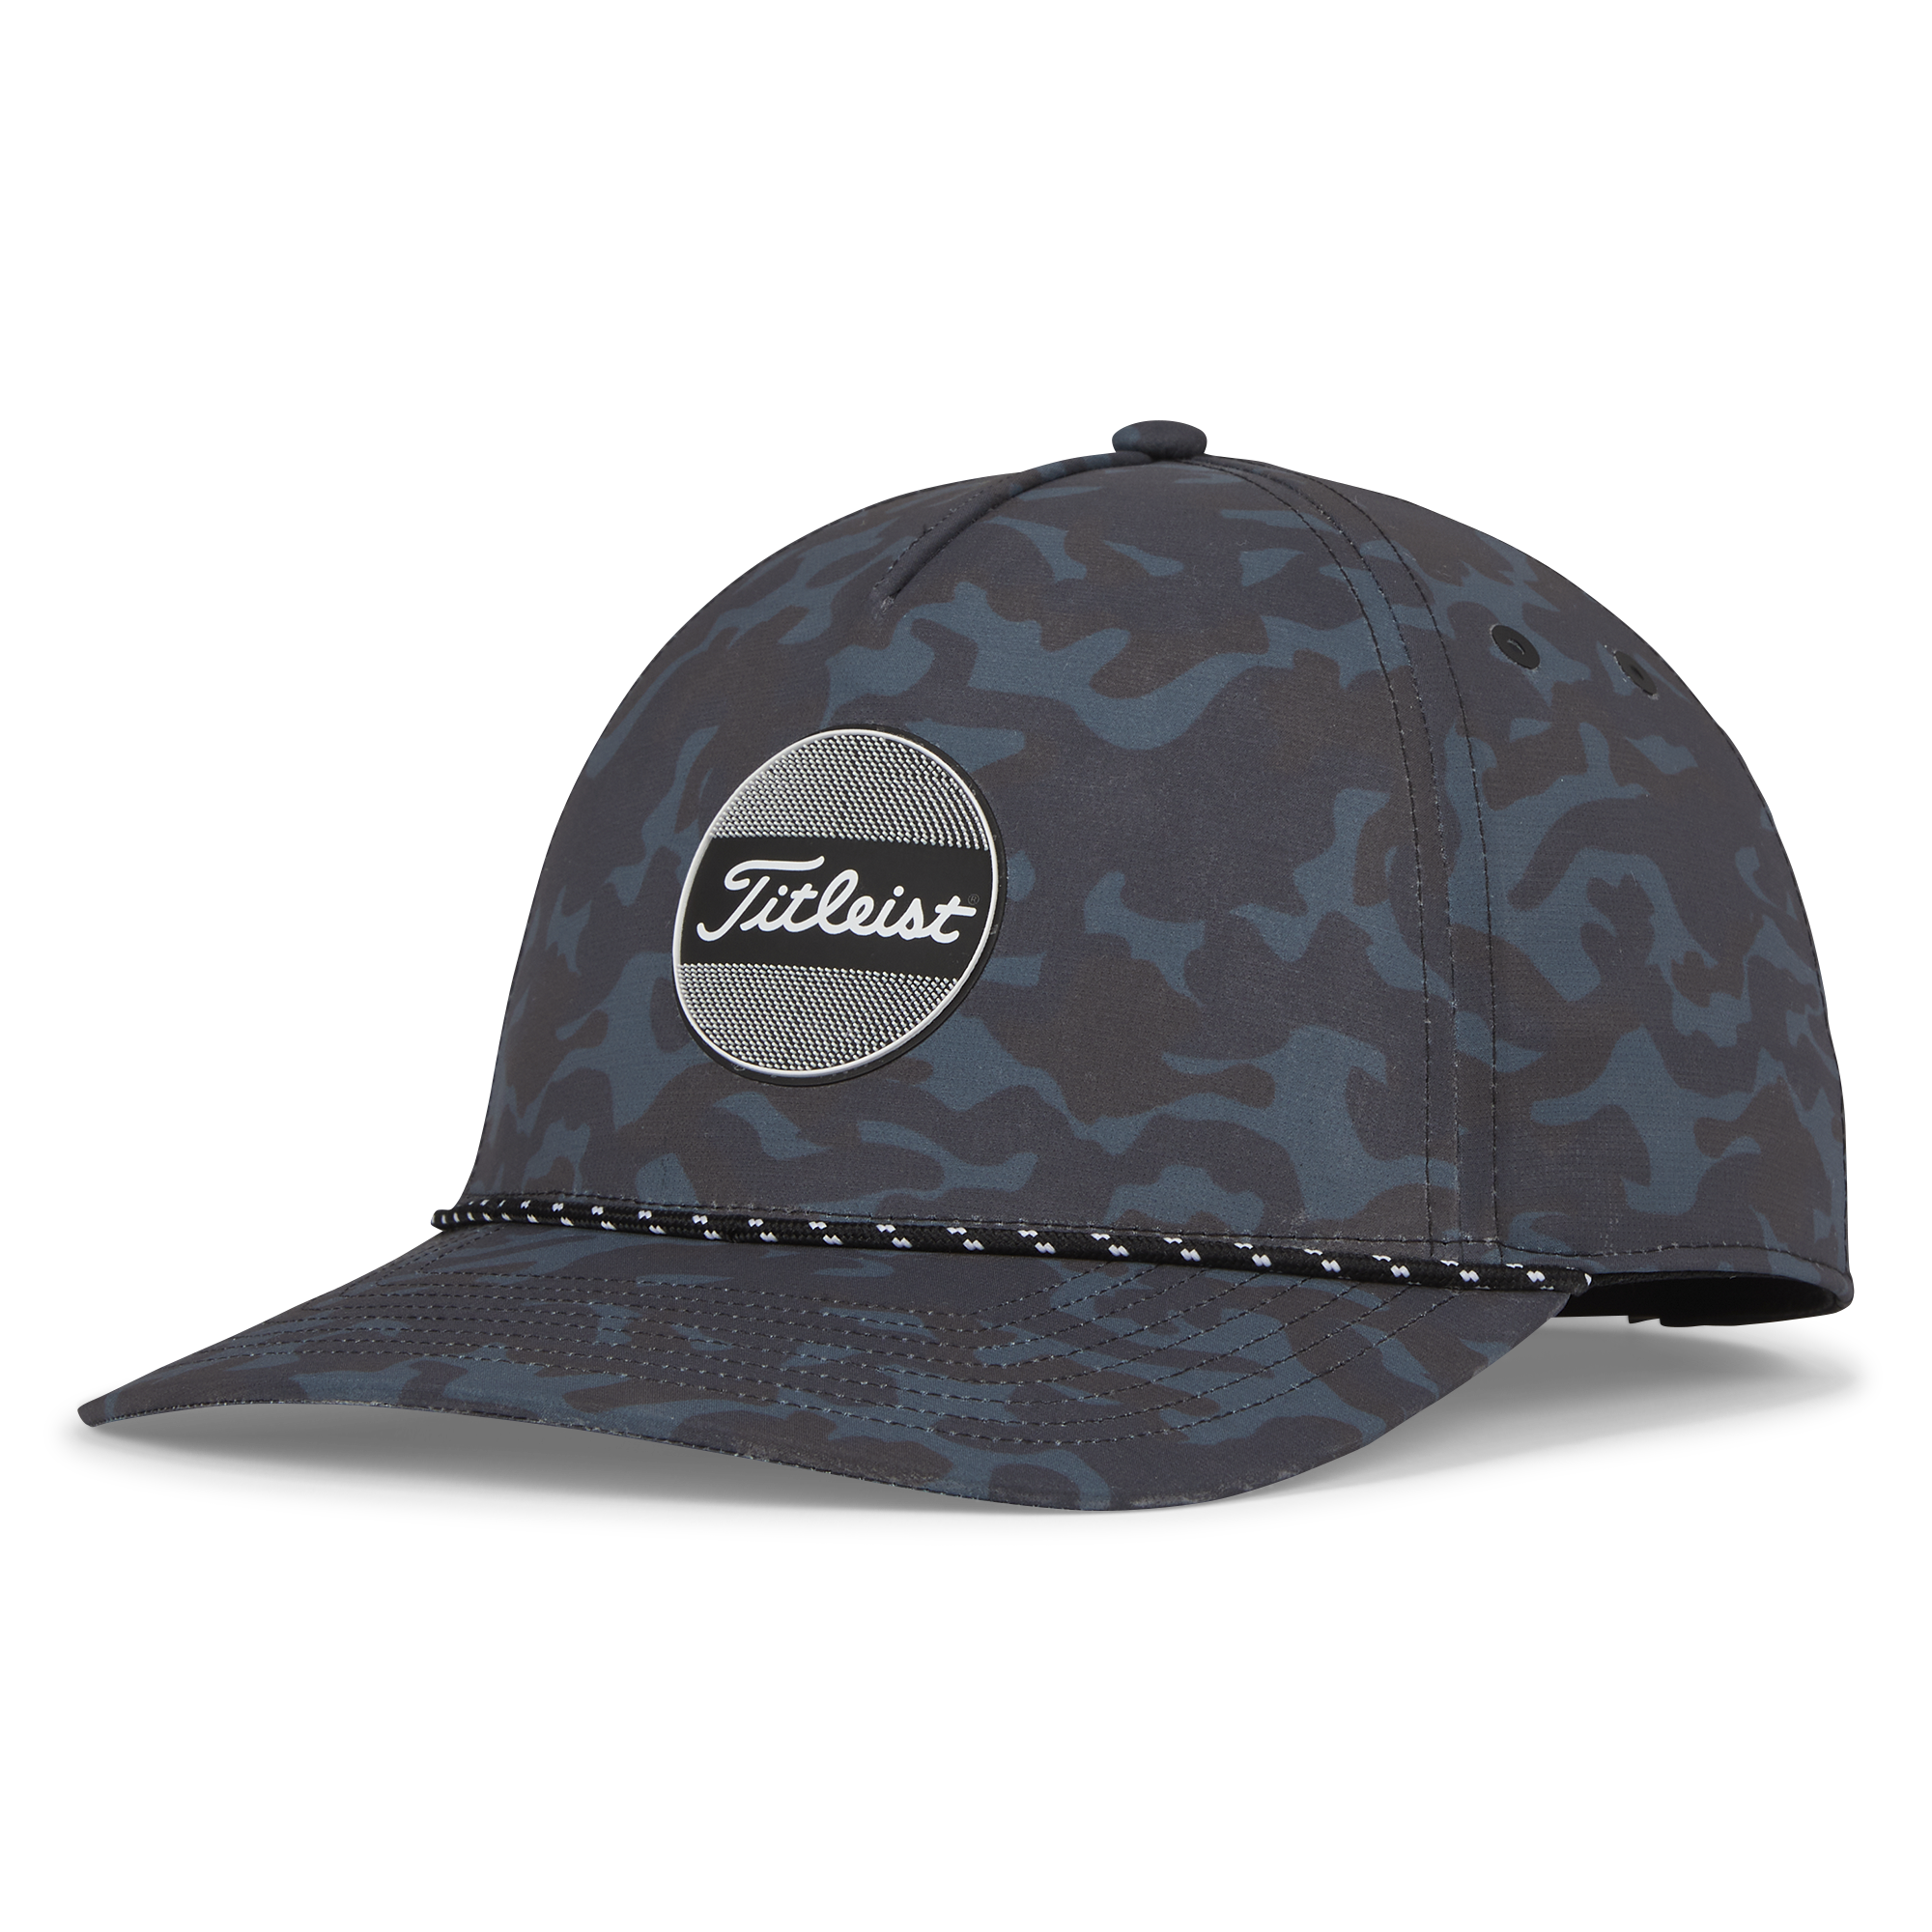 Titleist Official Boardwalk Rope in Black/Camo